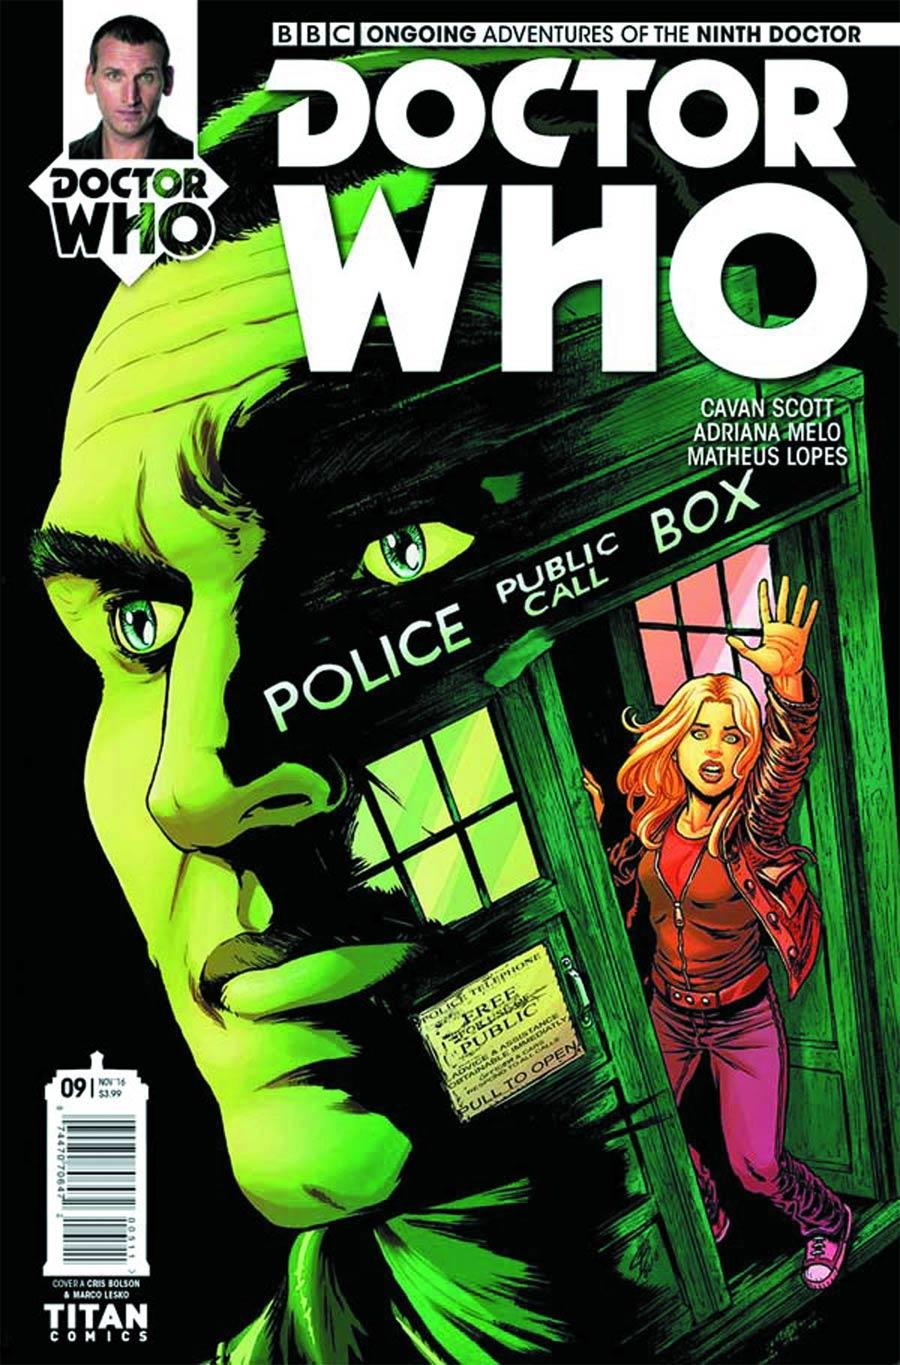 Doctor Who 9th Doctor Vol. 2 #9